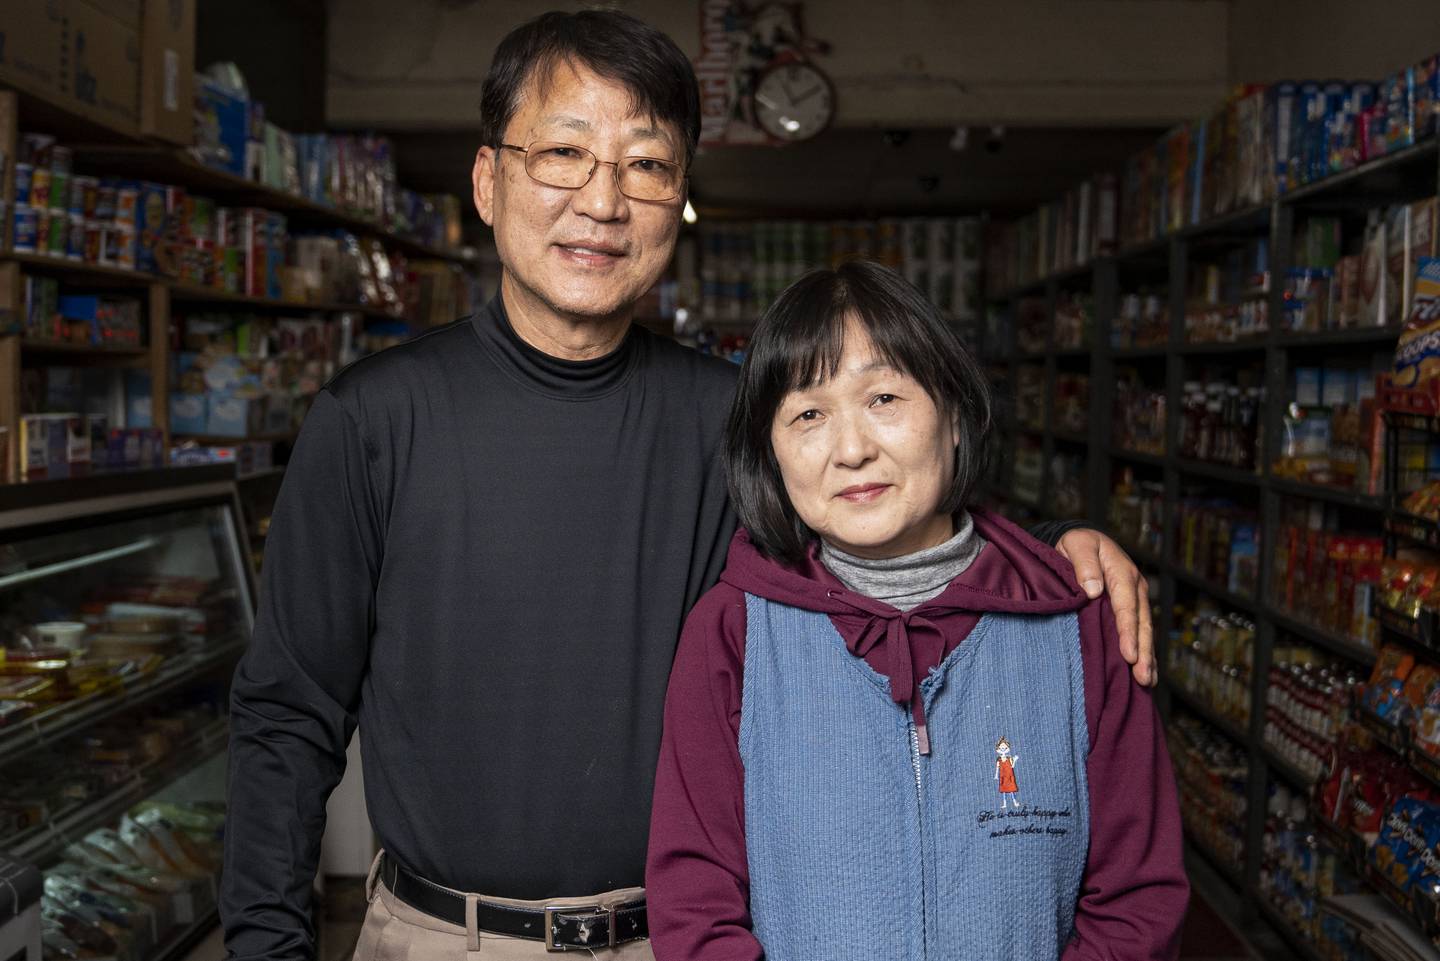 Kevin Lee and Tae Soon Lee pose for a portrait at Lee's Mini Market, in Baltimore, Thursday, December 1, 2022.